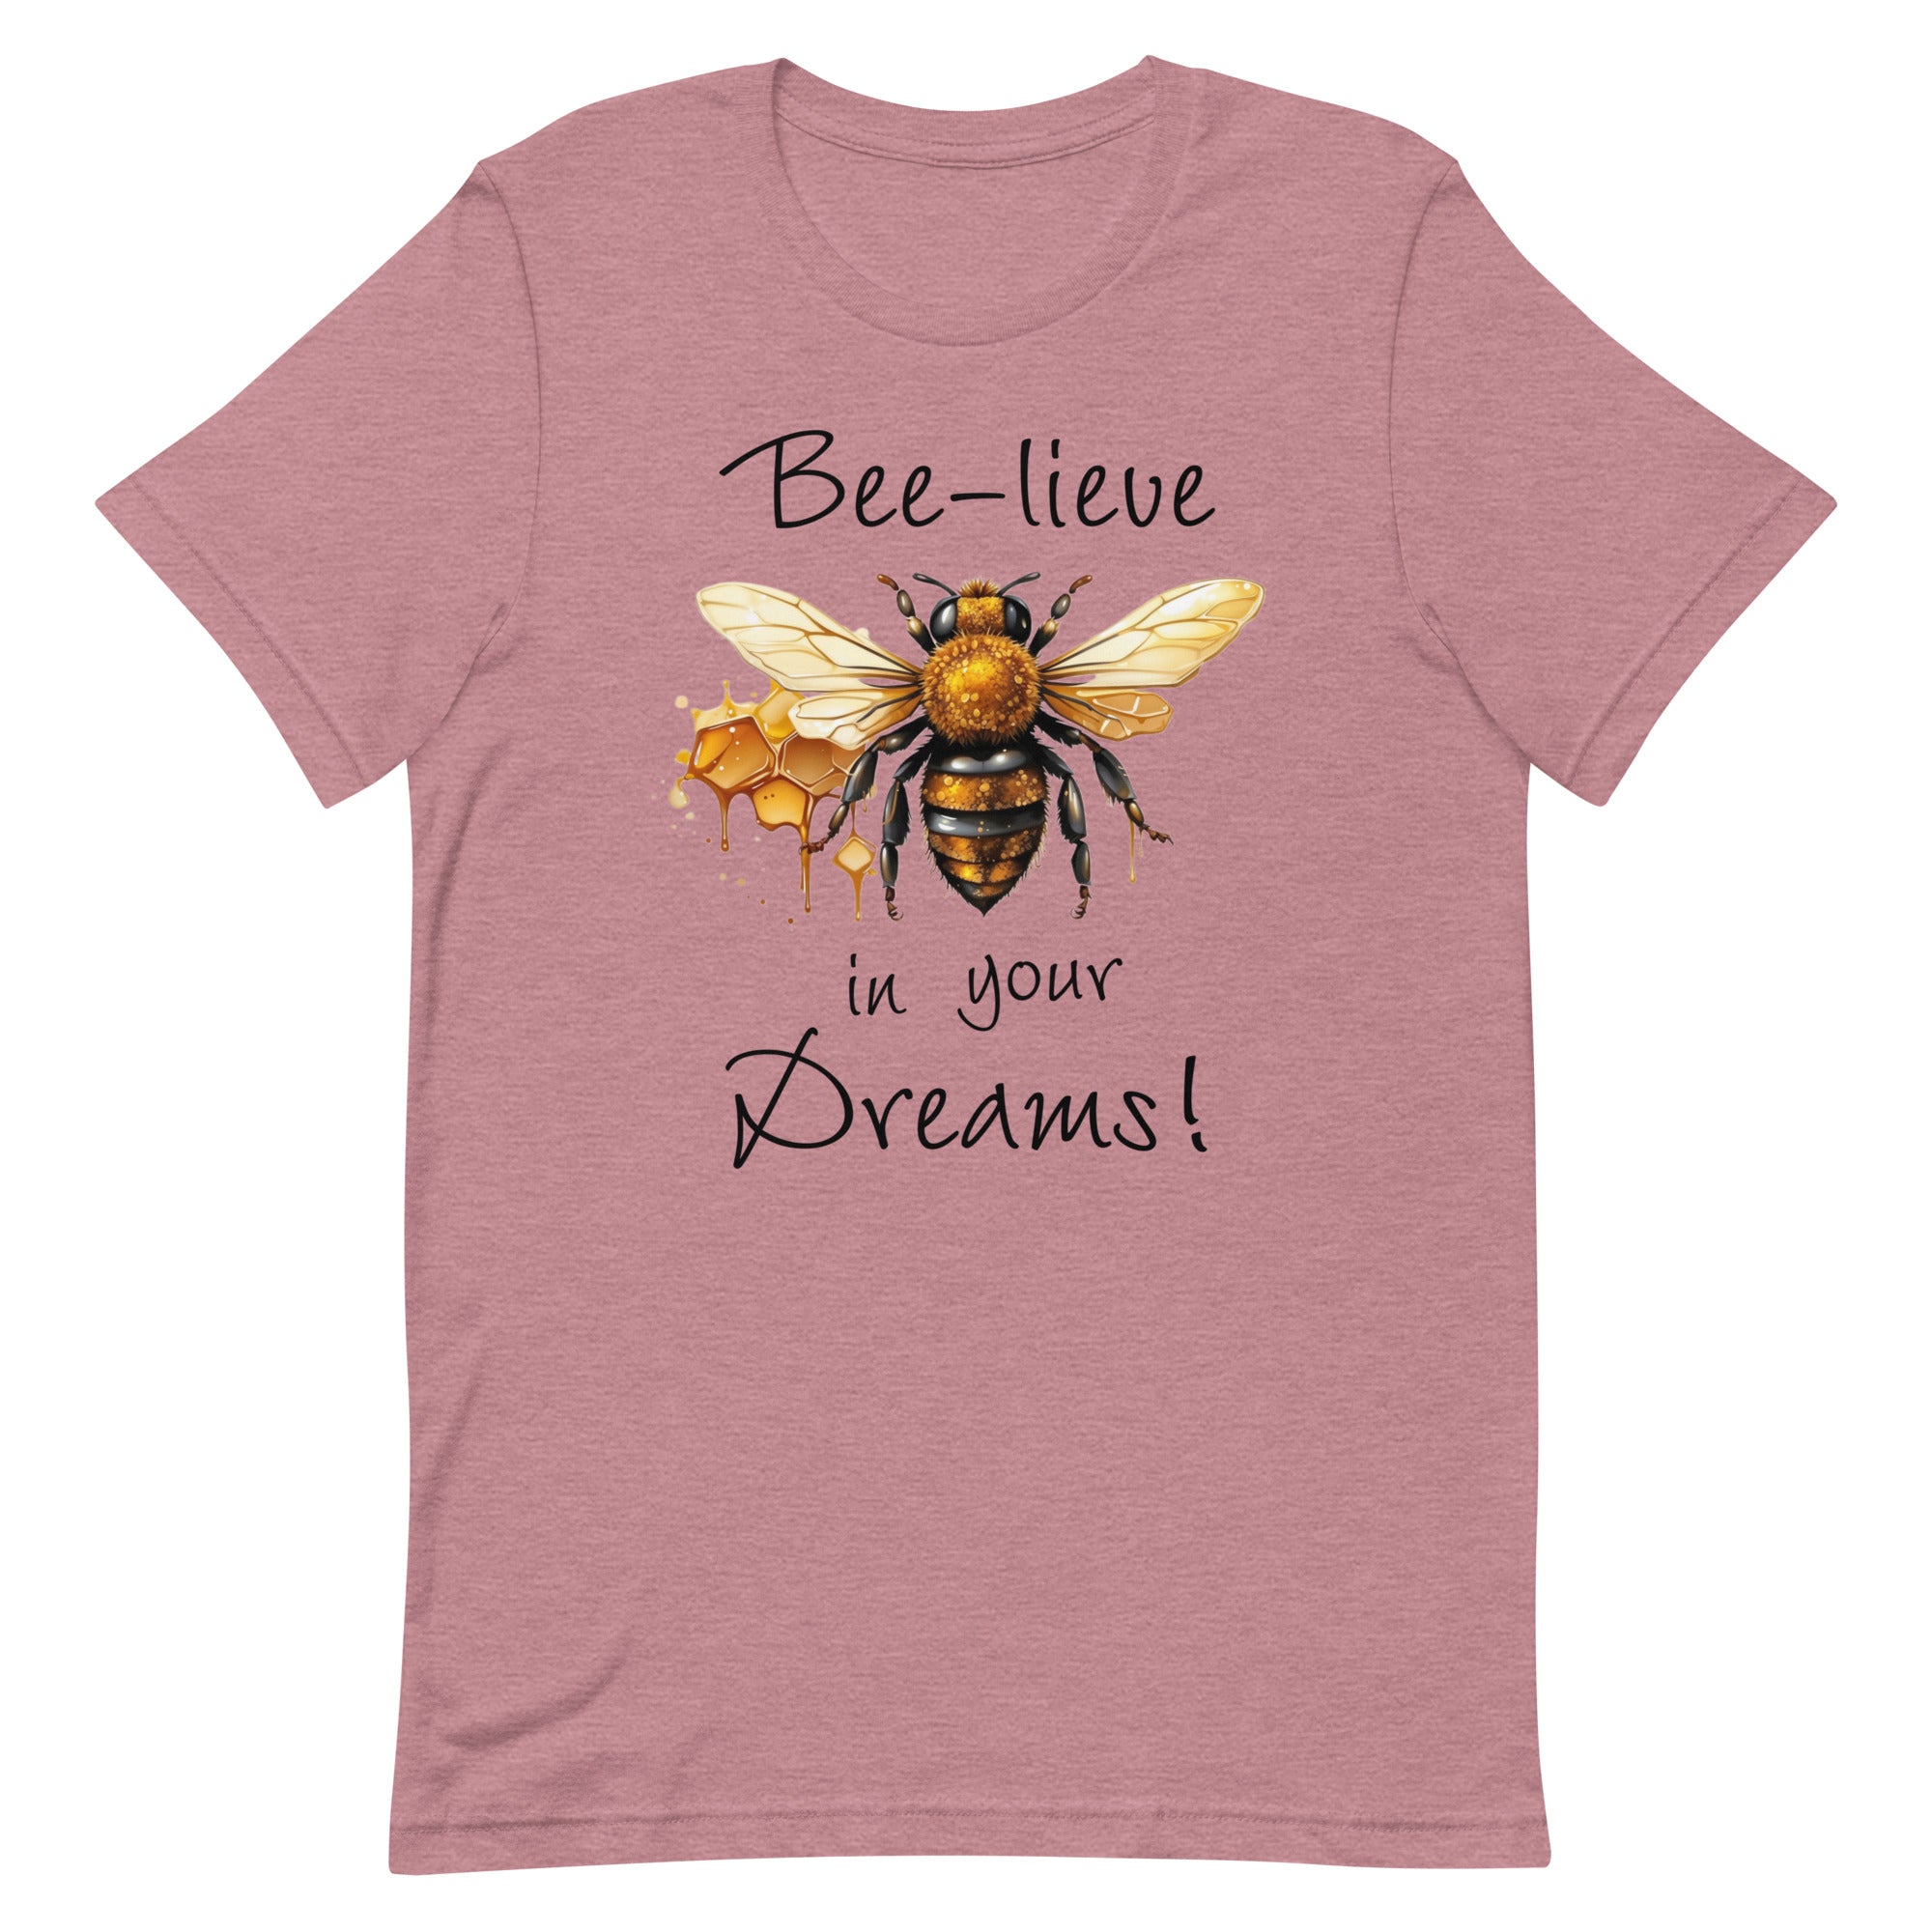 Bee-lieve in Your Dreams T-Shirt, Gift for Bee Lovers Heather Orchid XL M L S DenBox